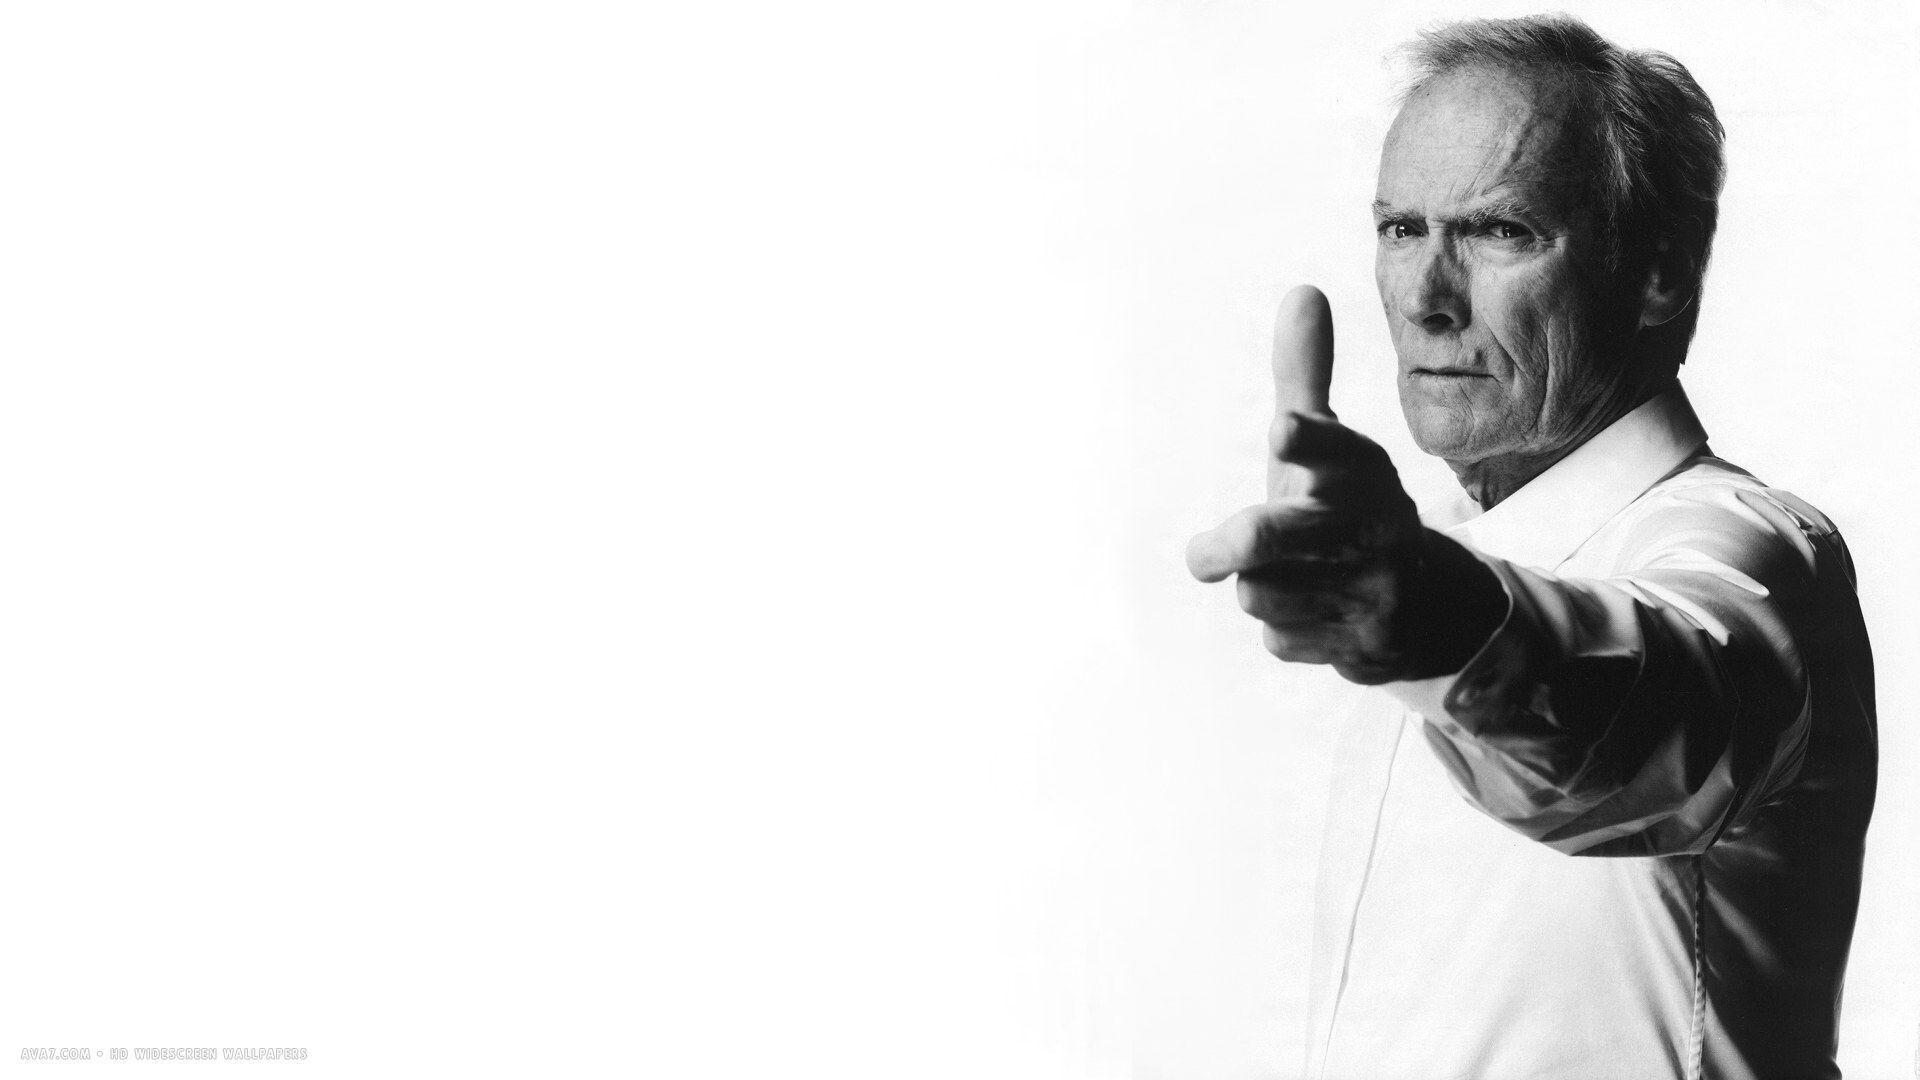 Clint Eastwood: An Academy Award Nominee For Best Actor, "Best Director" And "Best Picture" Awards For Western Film "Unforgiven" (1992) And Sports Drama "Million Dollar Baby" (2004). 1920x1080 Full HD Background.